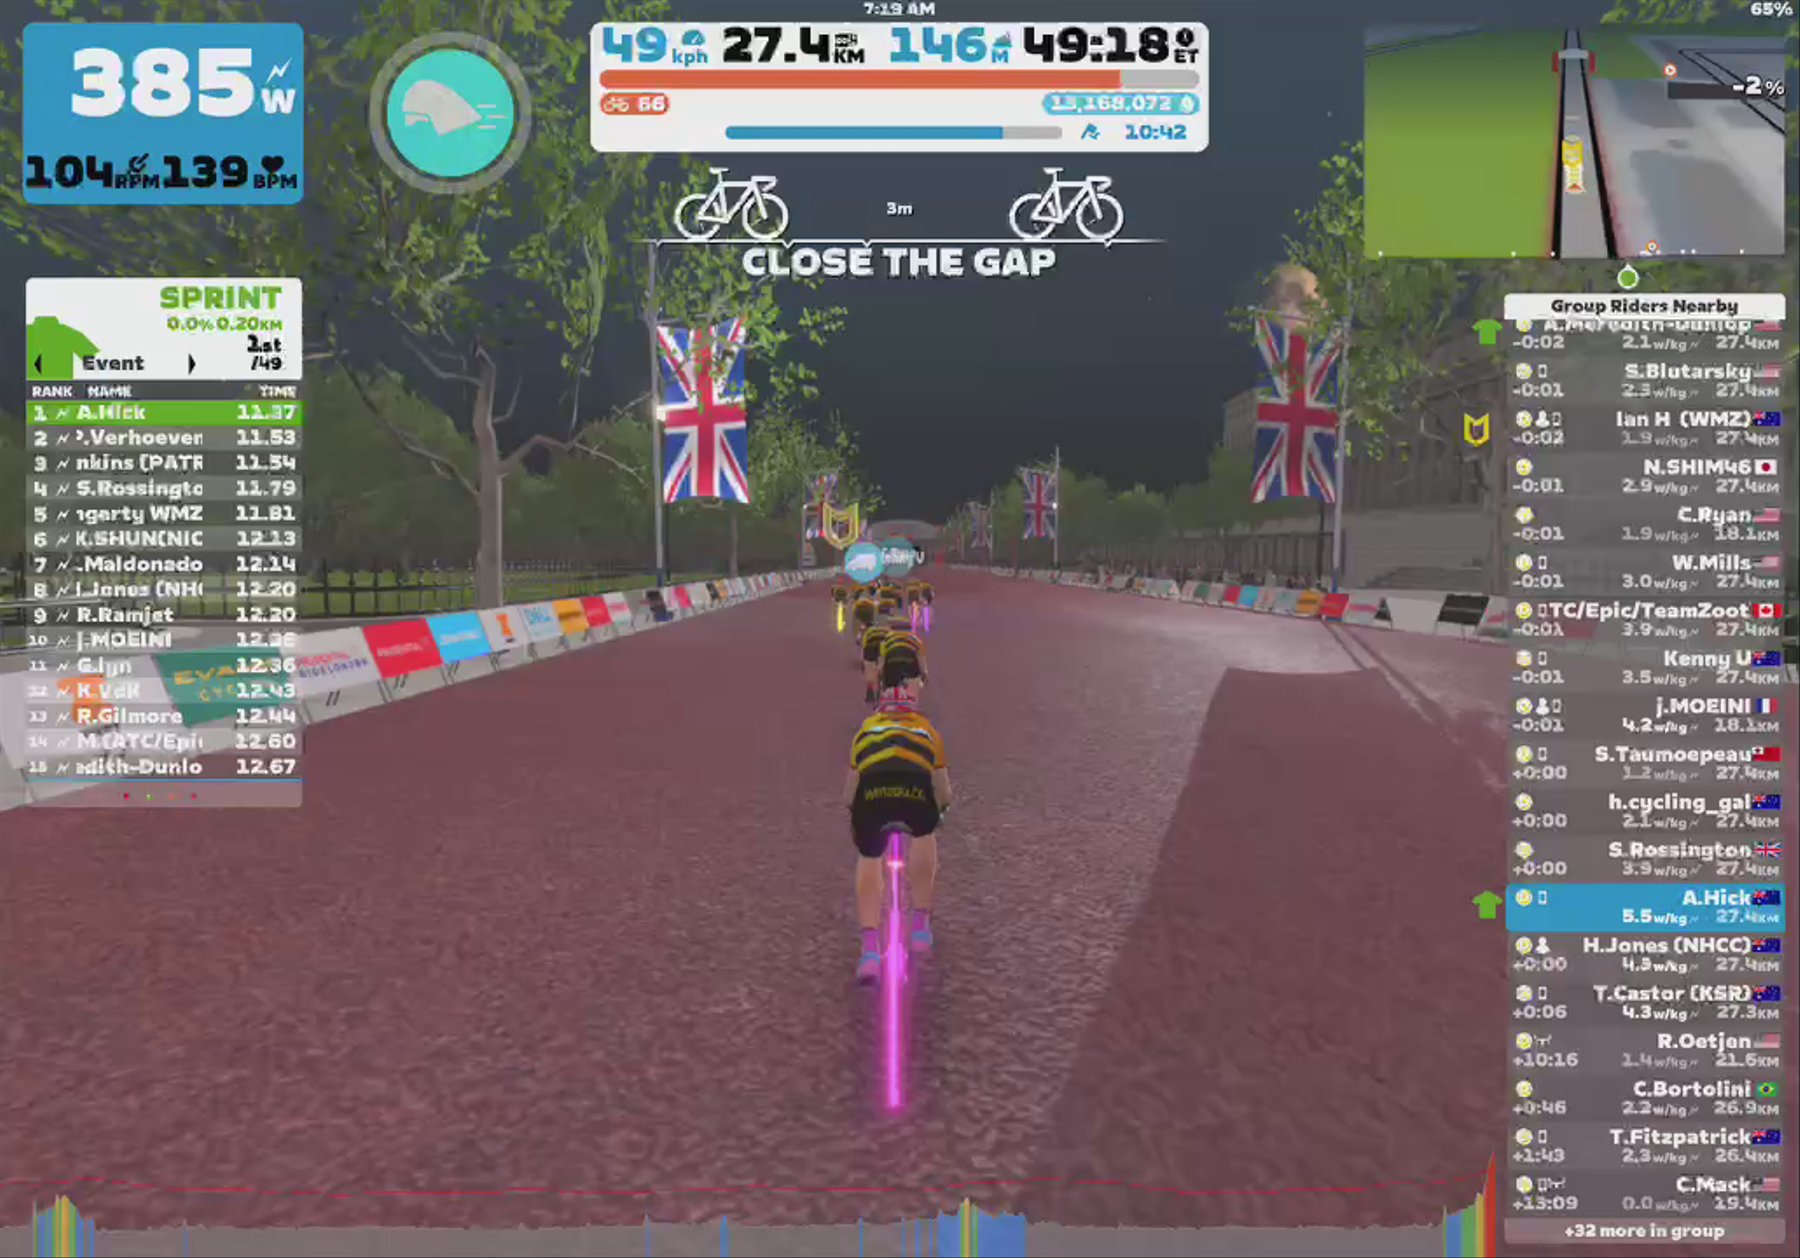 Zwift - Group Ride: WMZ Bonjour Recovery & Optional Sprints (p/b Champion Systems) (D) on Classique in London